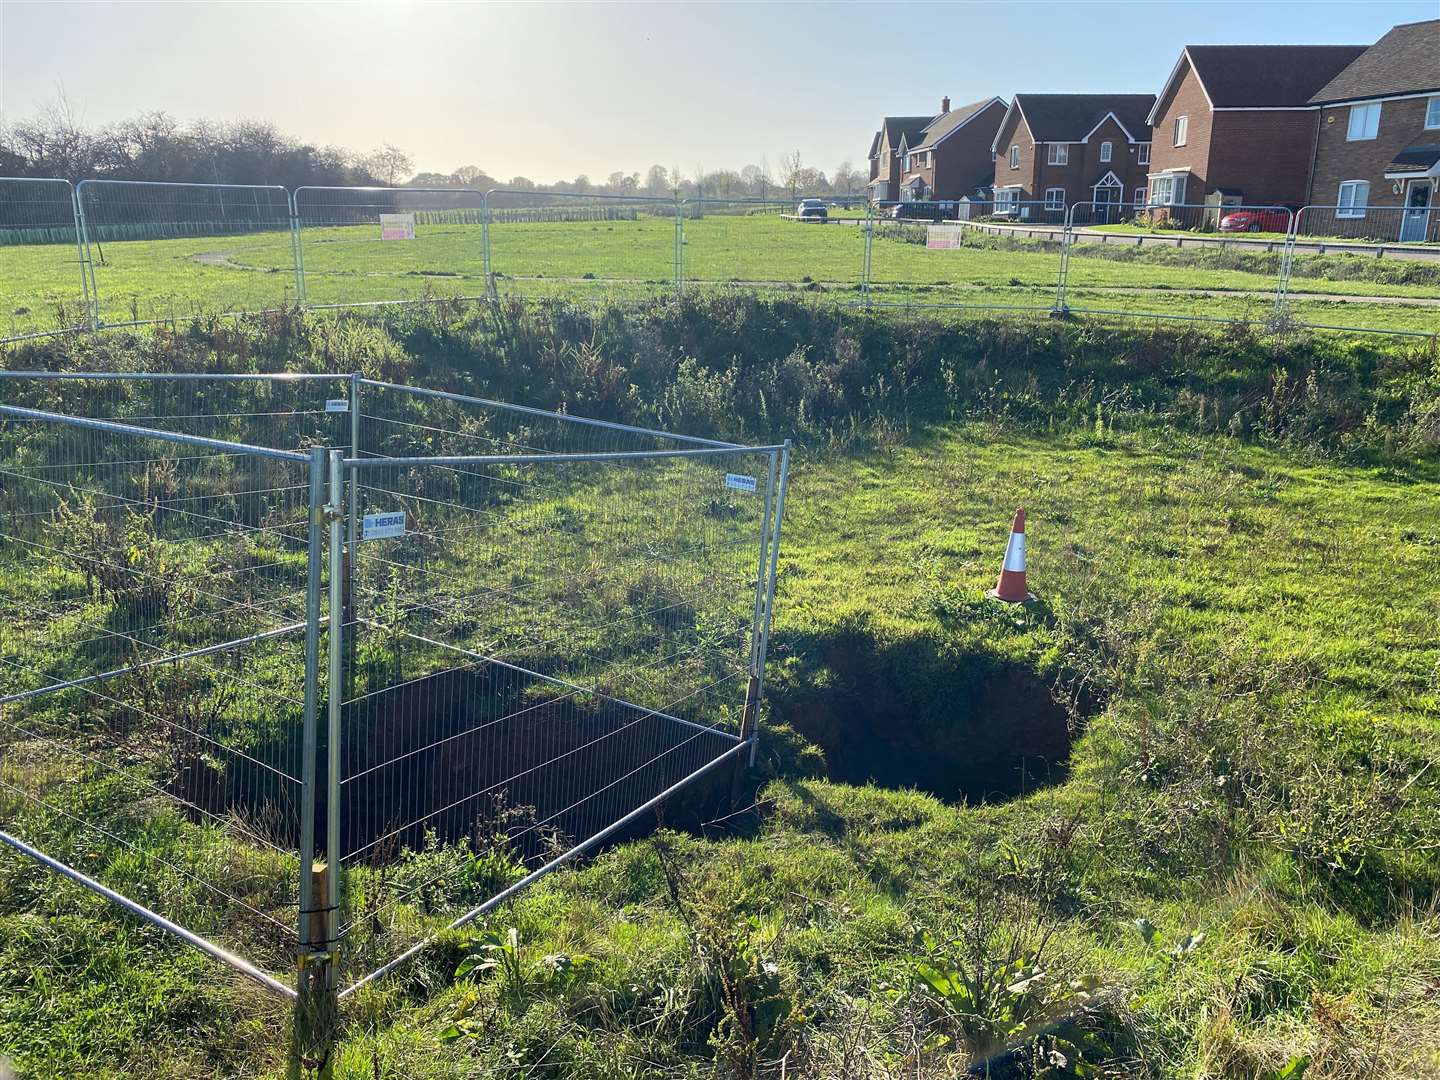 The hole pictured in November last year